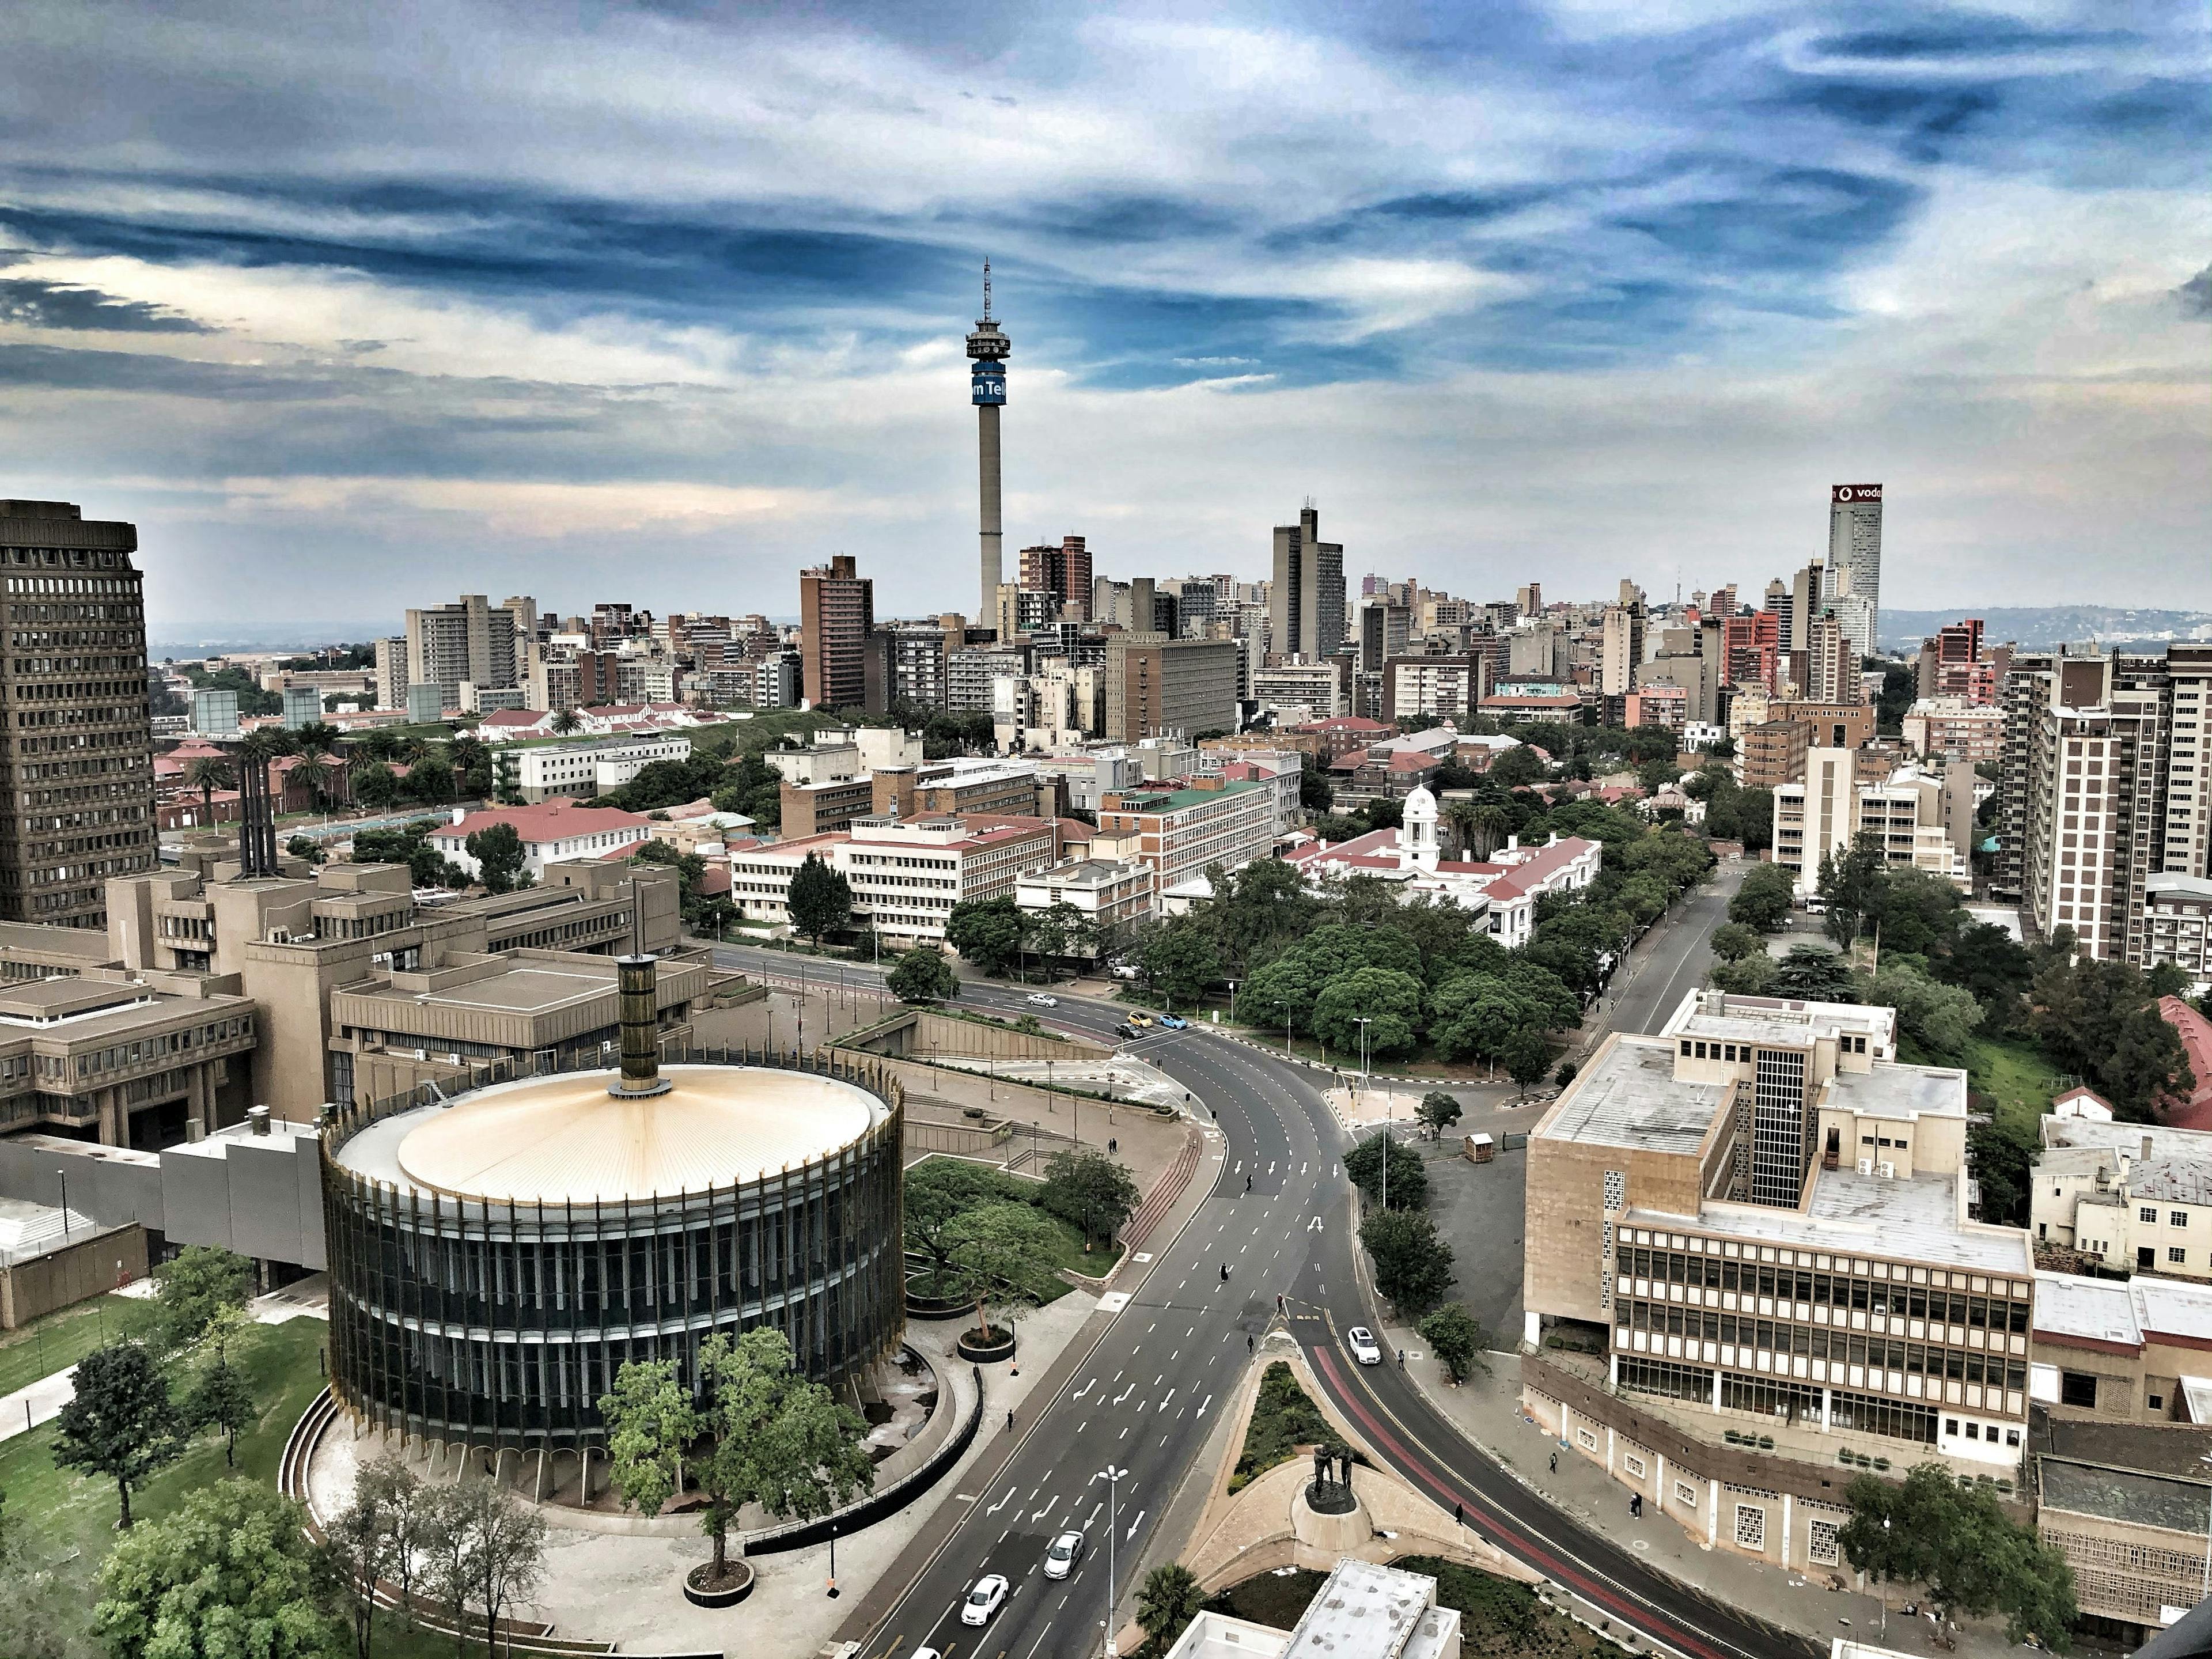 Johannesburg city in South Africa.